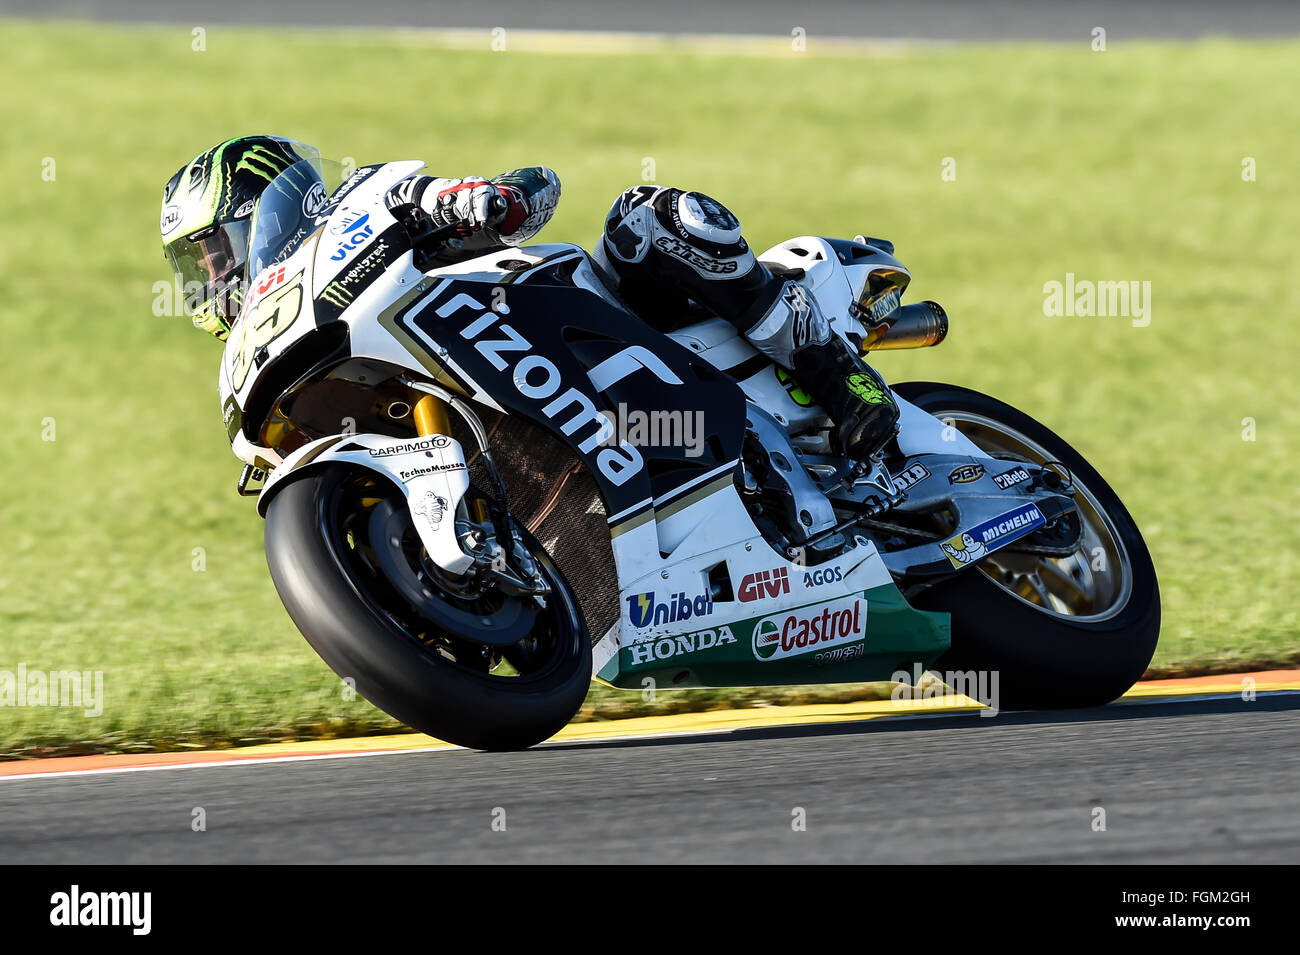 Cal Crutchlow in action during Motogp winter test Stock Photo